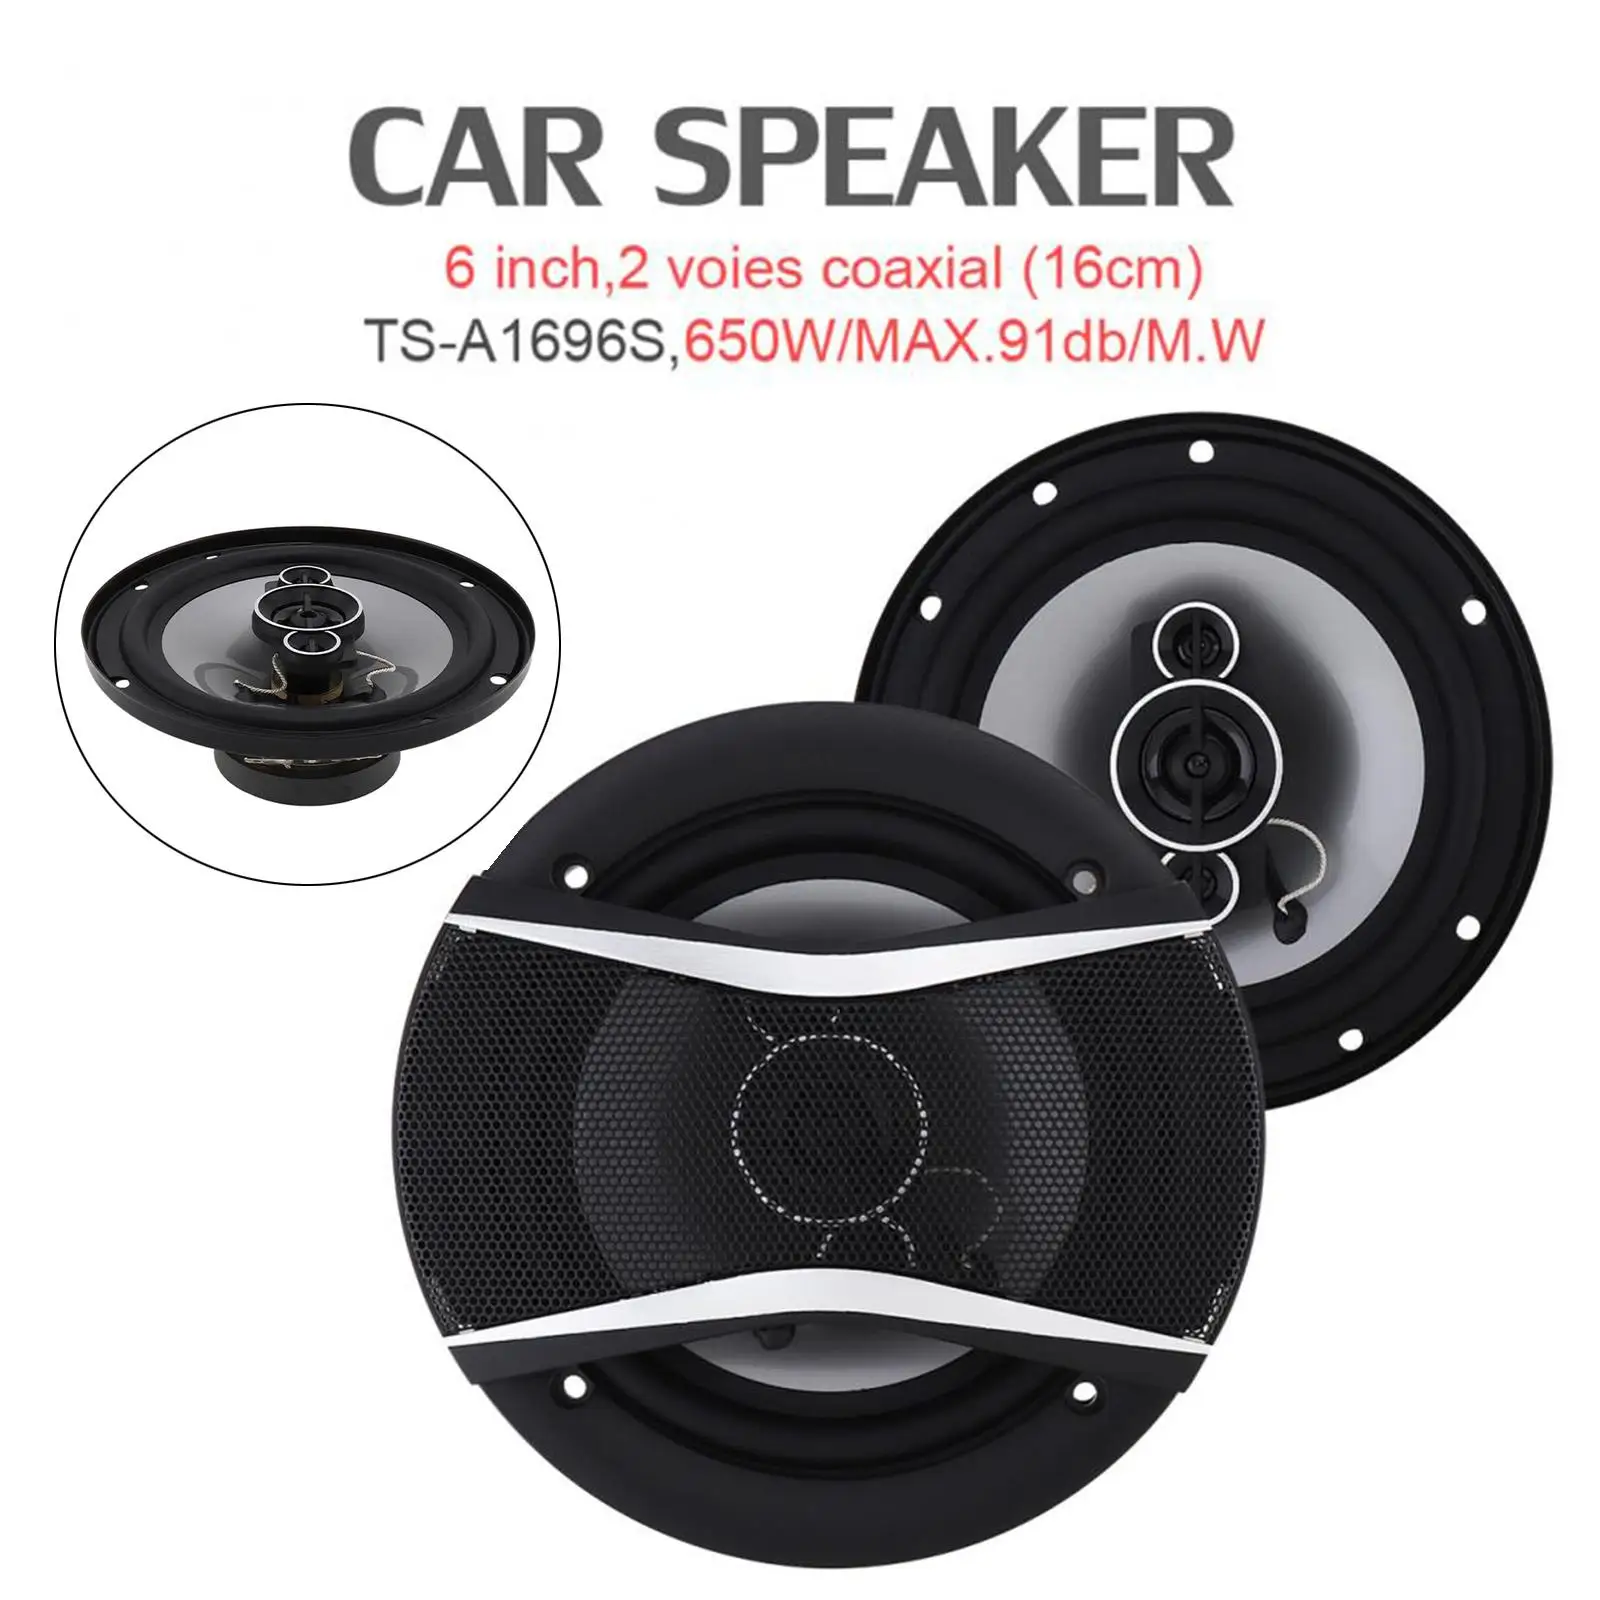 Portable Car HiFi Coaxial Speaker Easy to Install Spare Parts Full Range Loudspeaker Horn Audio for Automobile SUV Vehicle